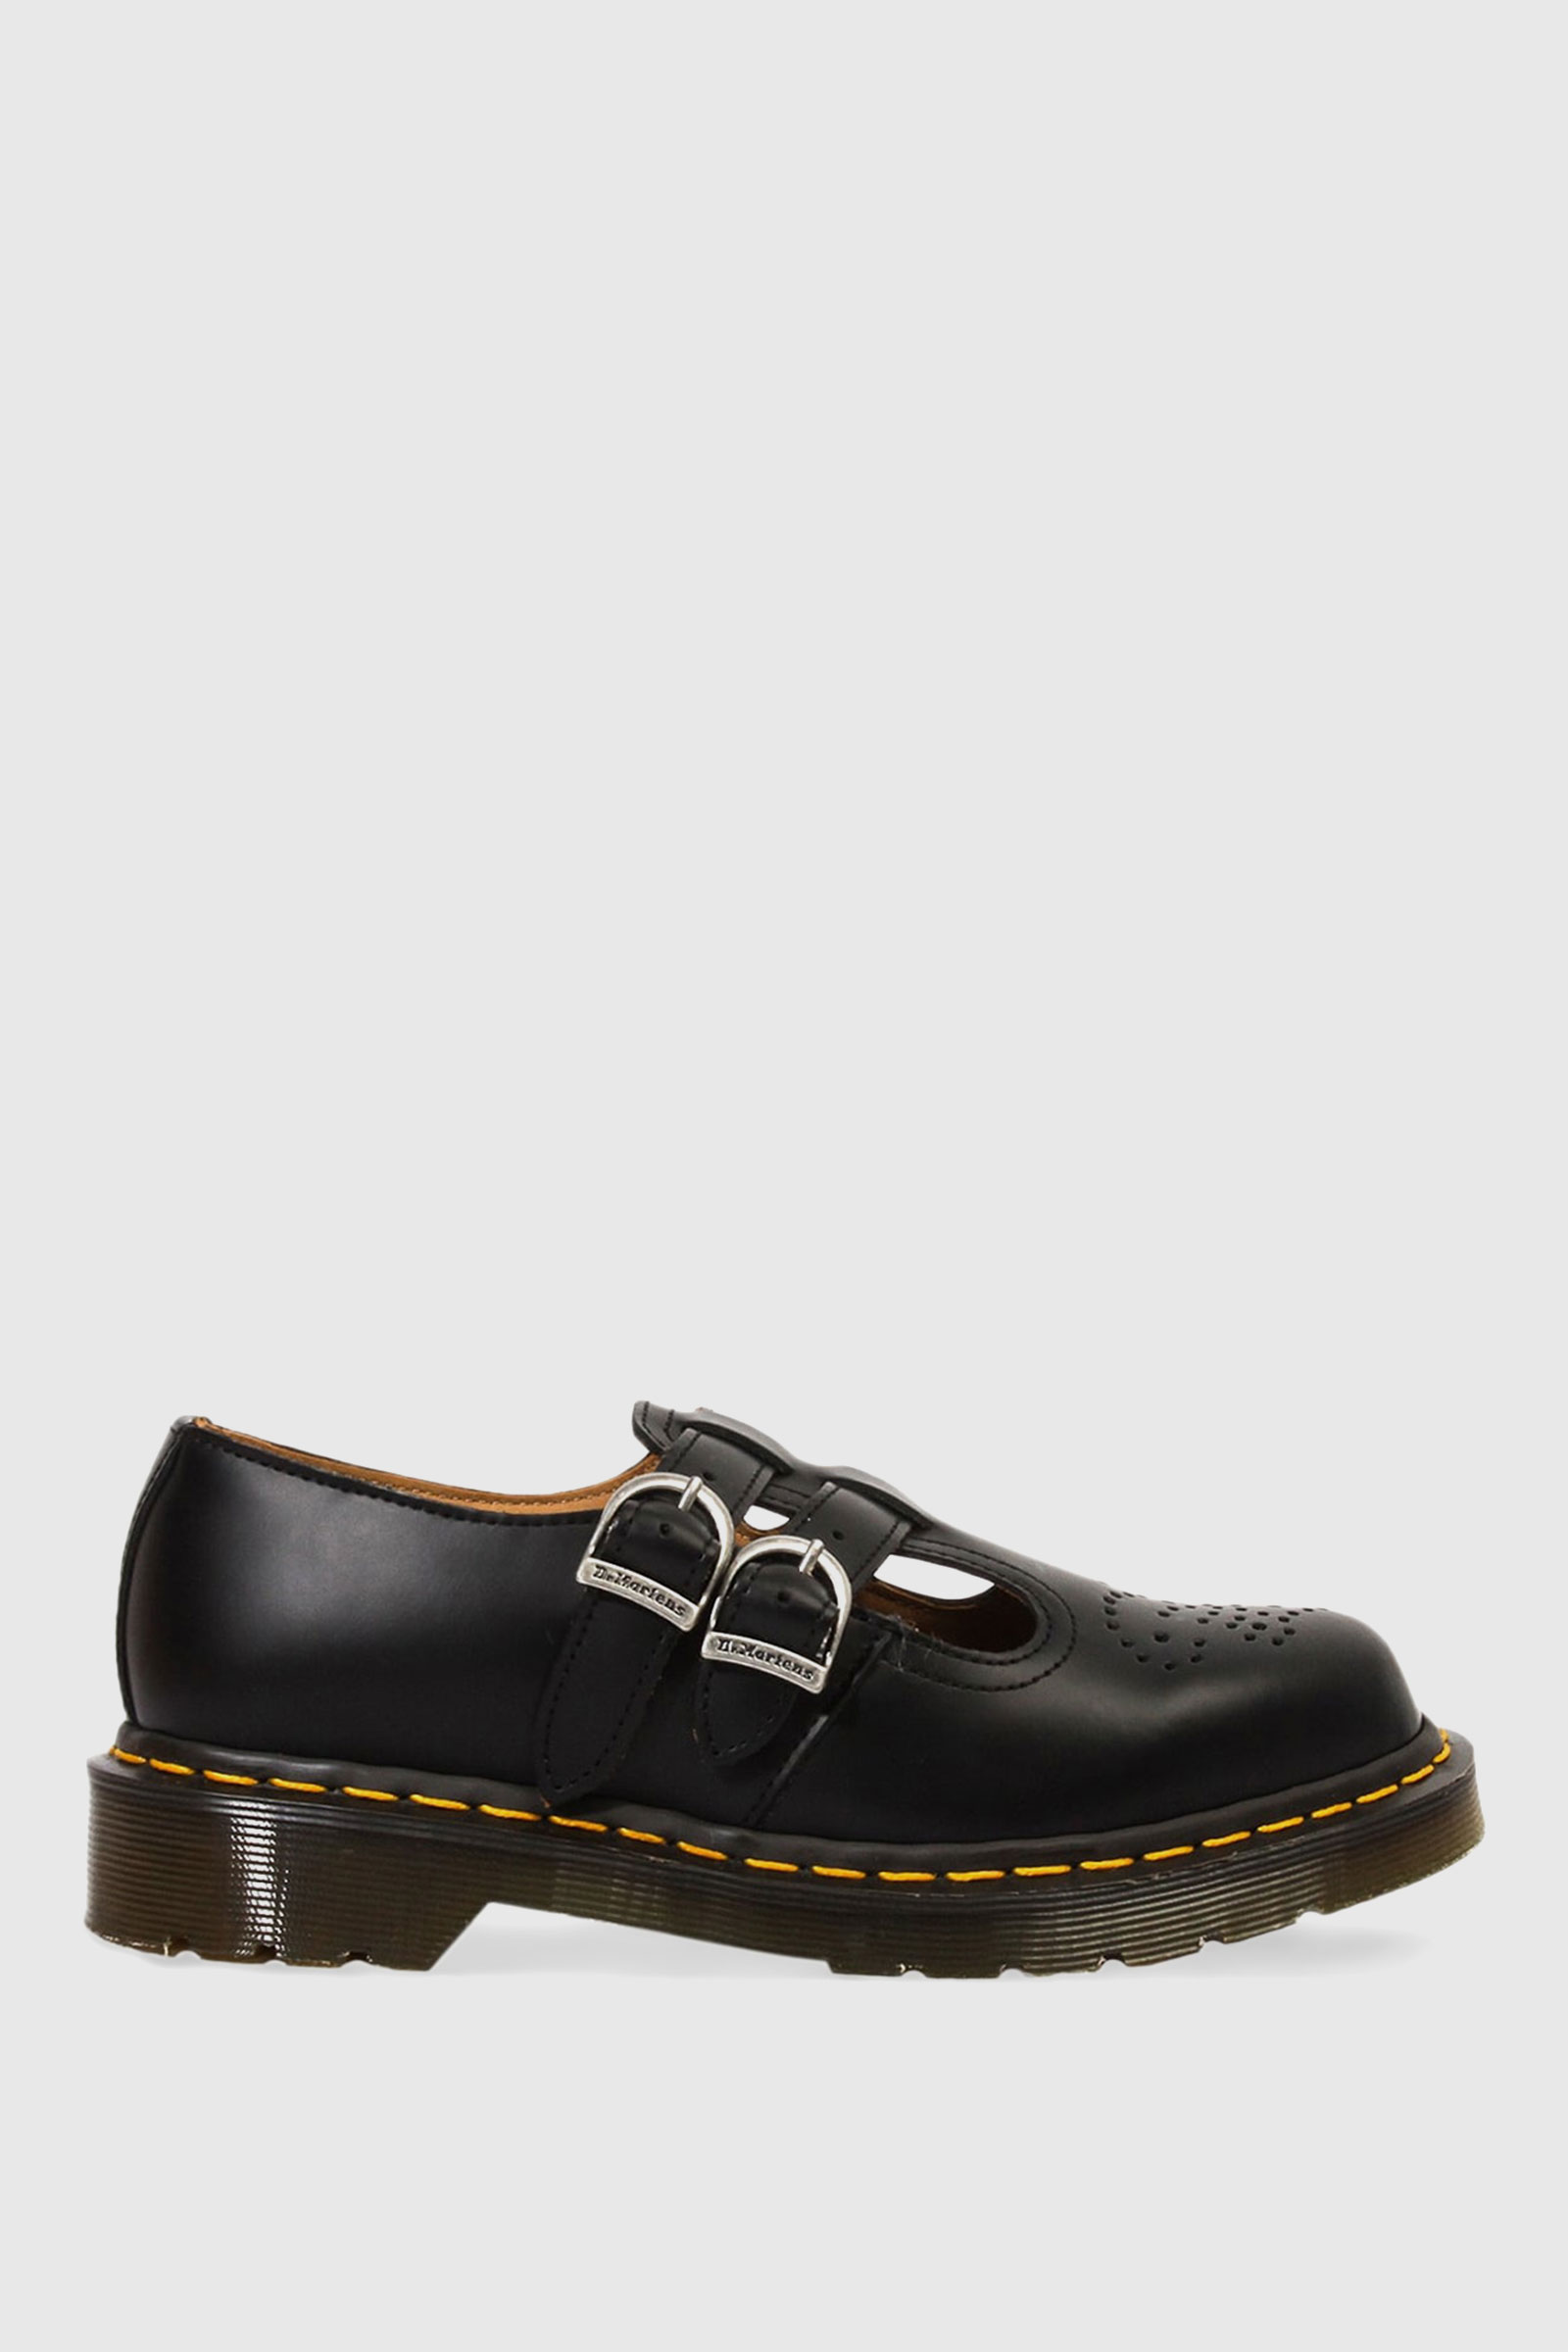 Wood Wood - Dr. Martens Smooth Leather